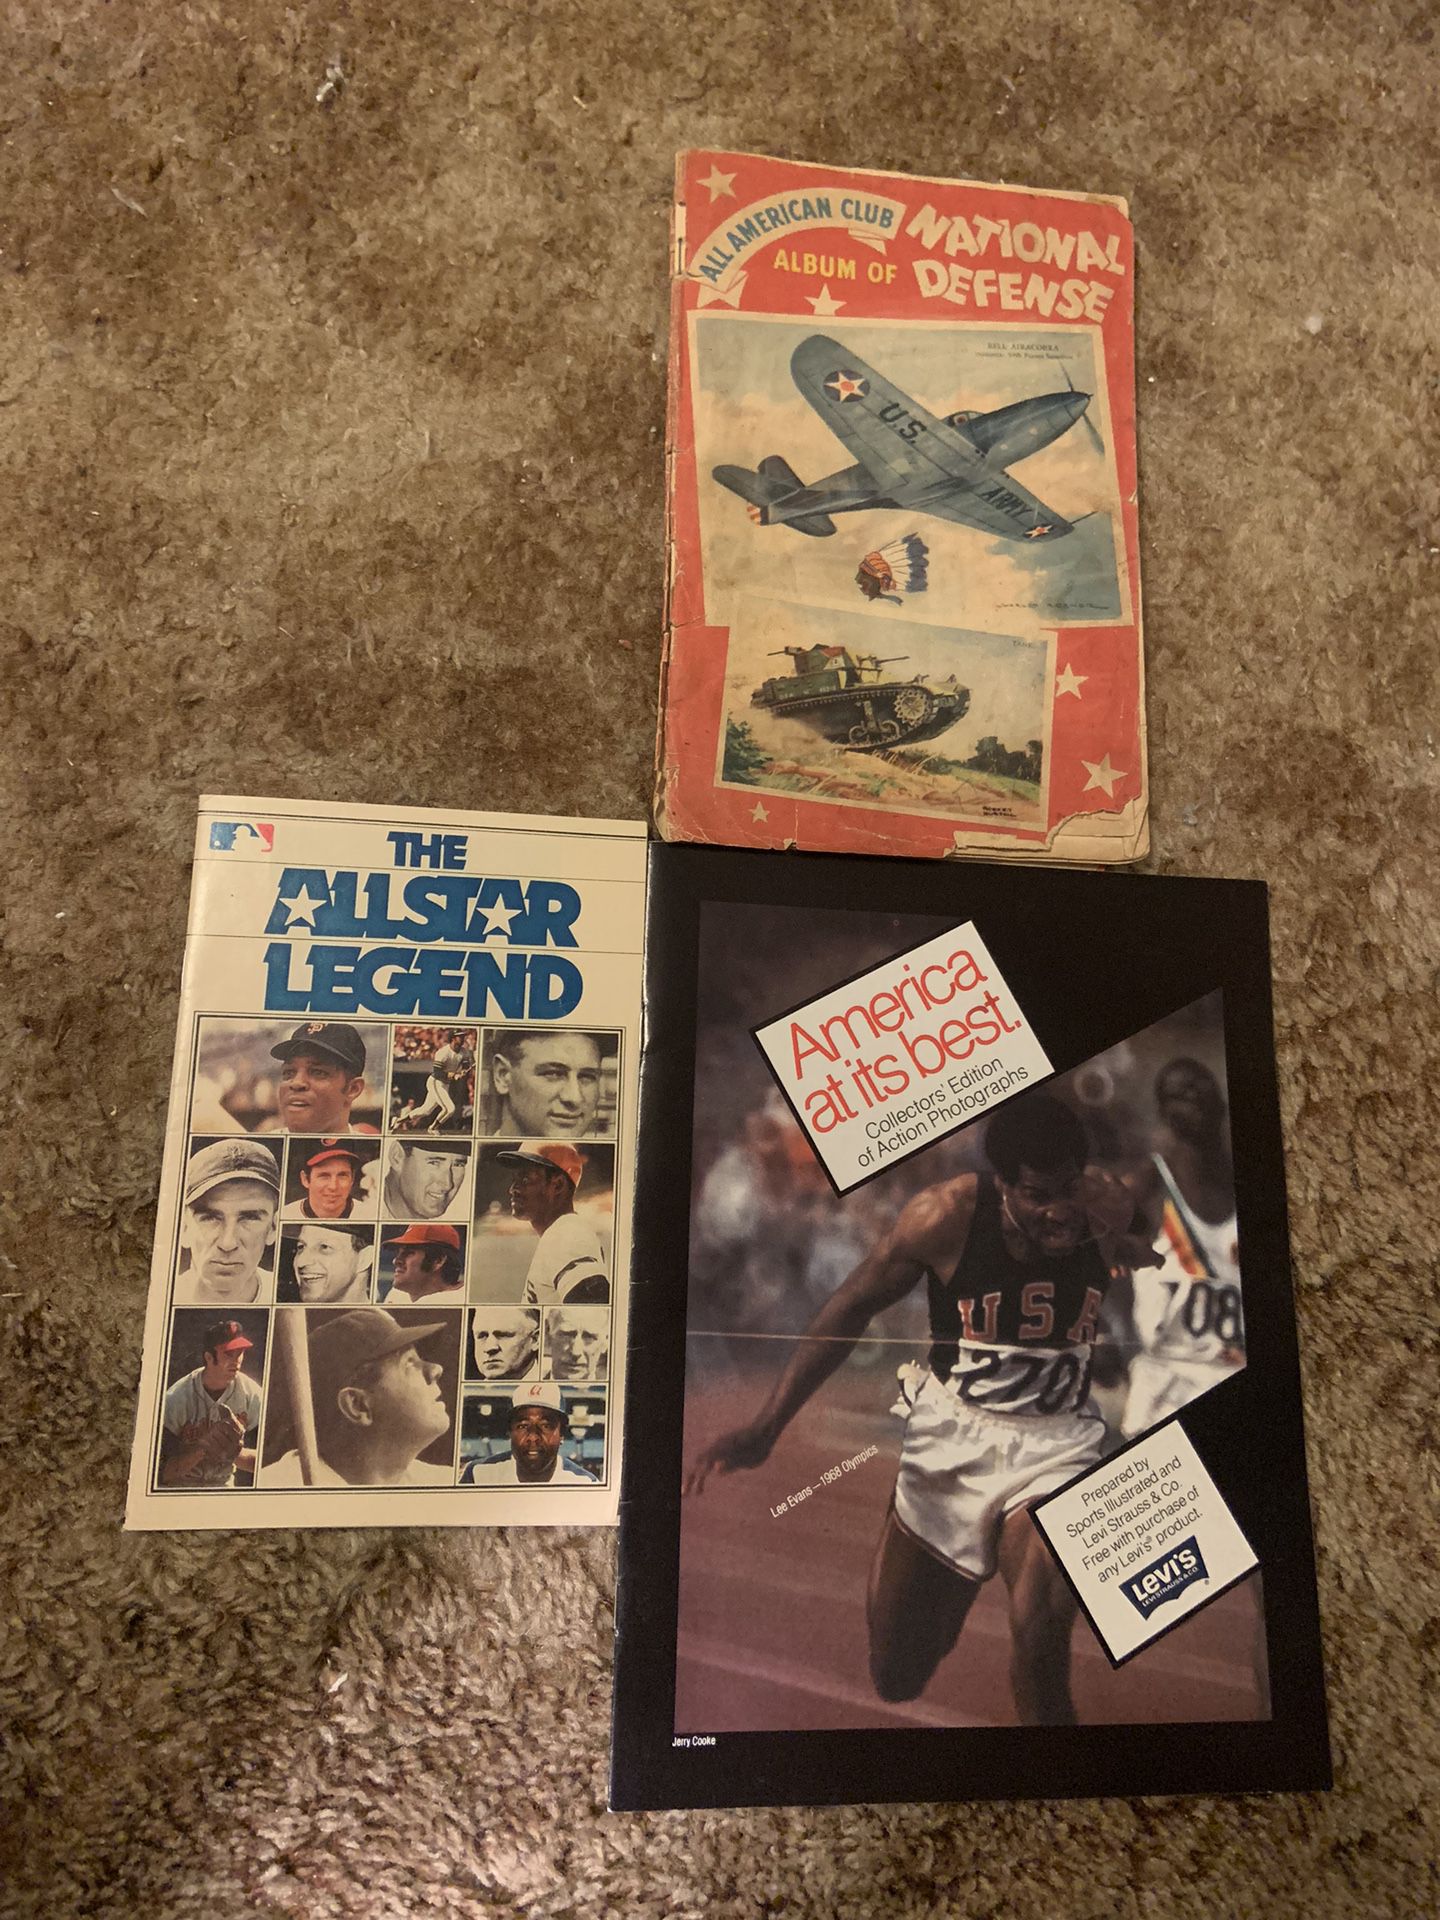 Vintage Pamphlets For Sports And Activity Book With Airplanes. 